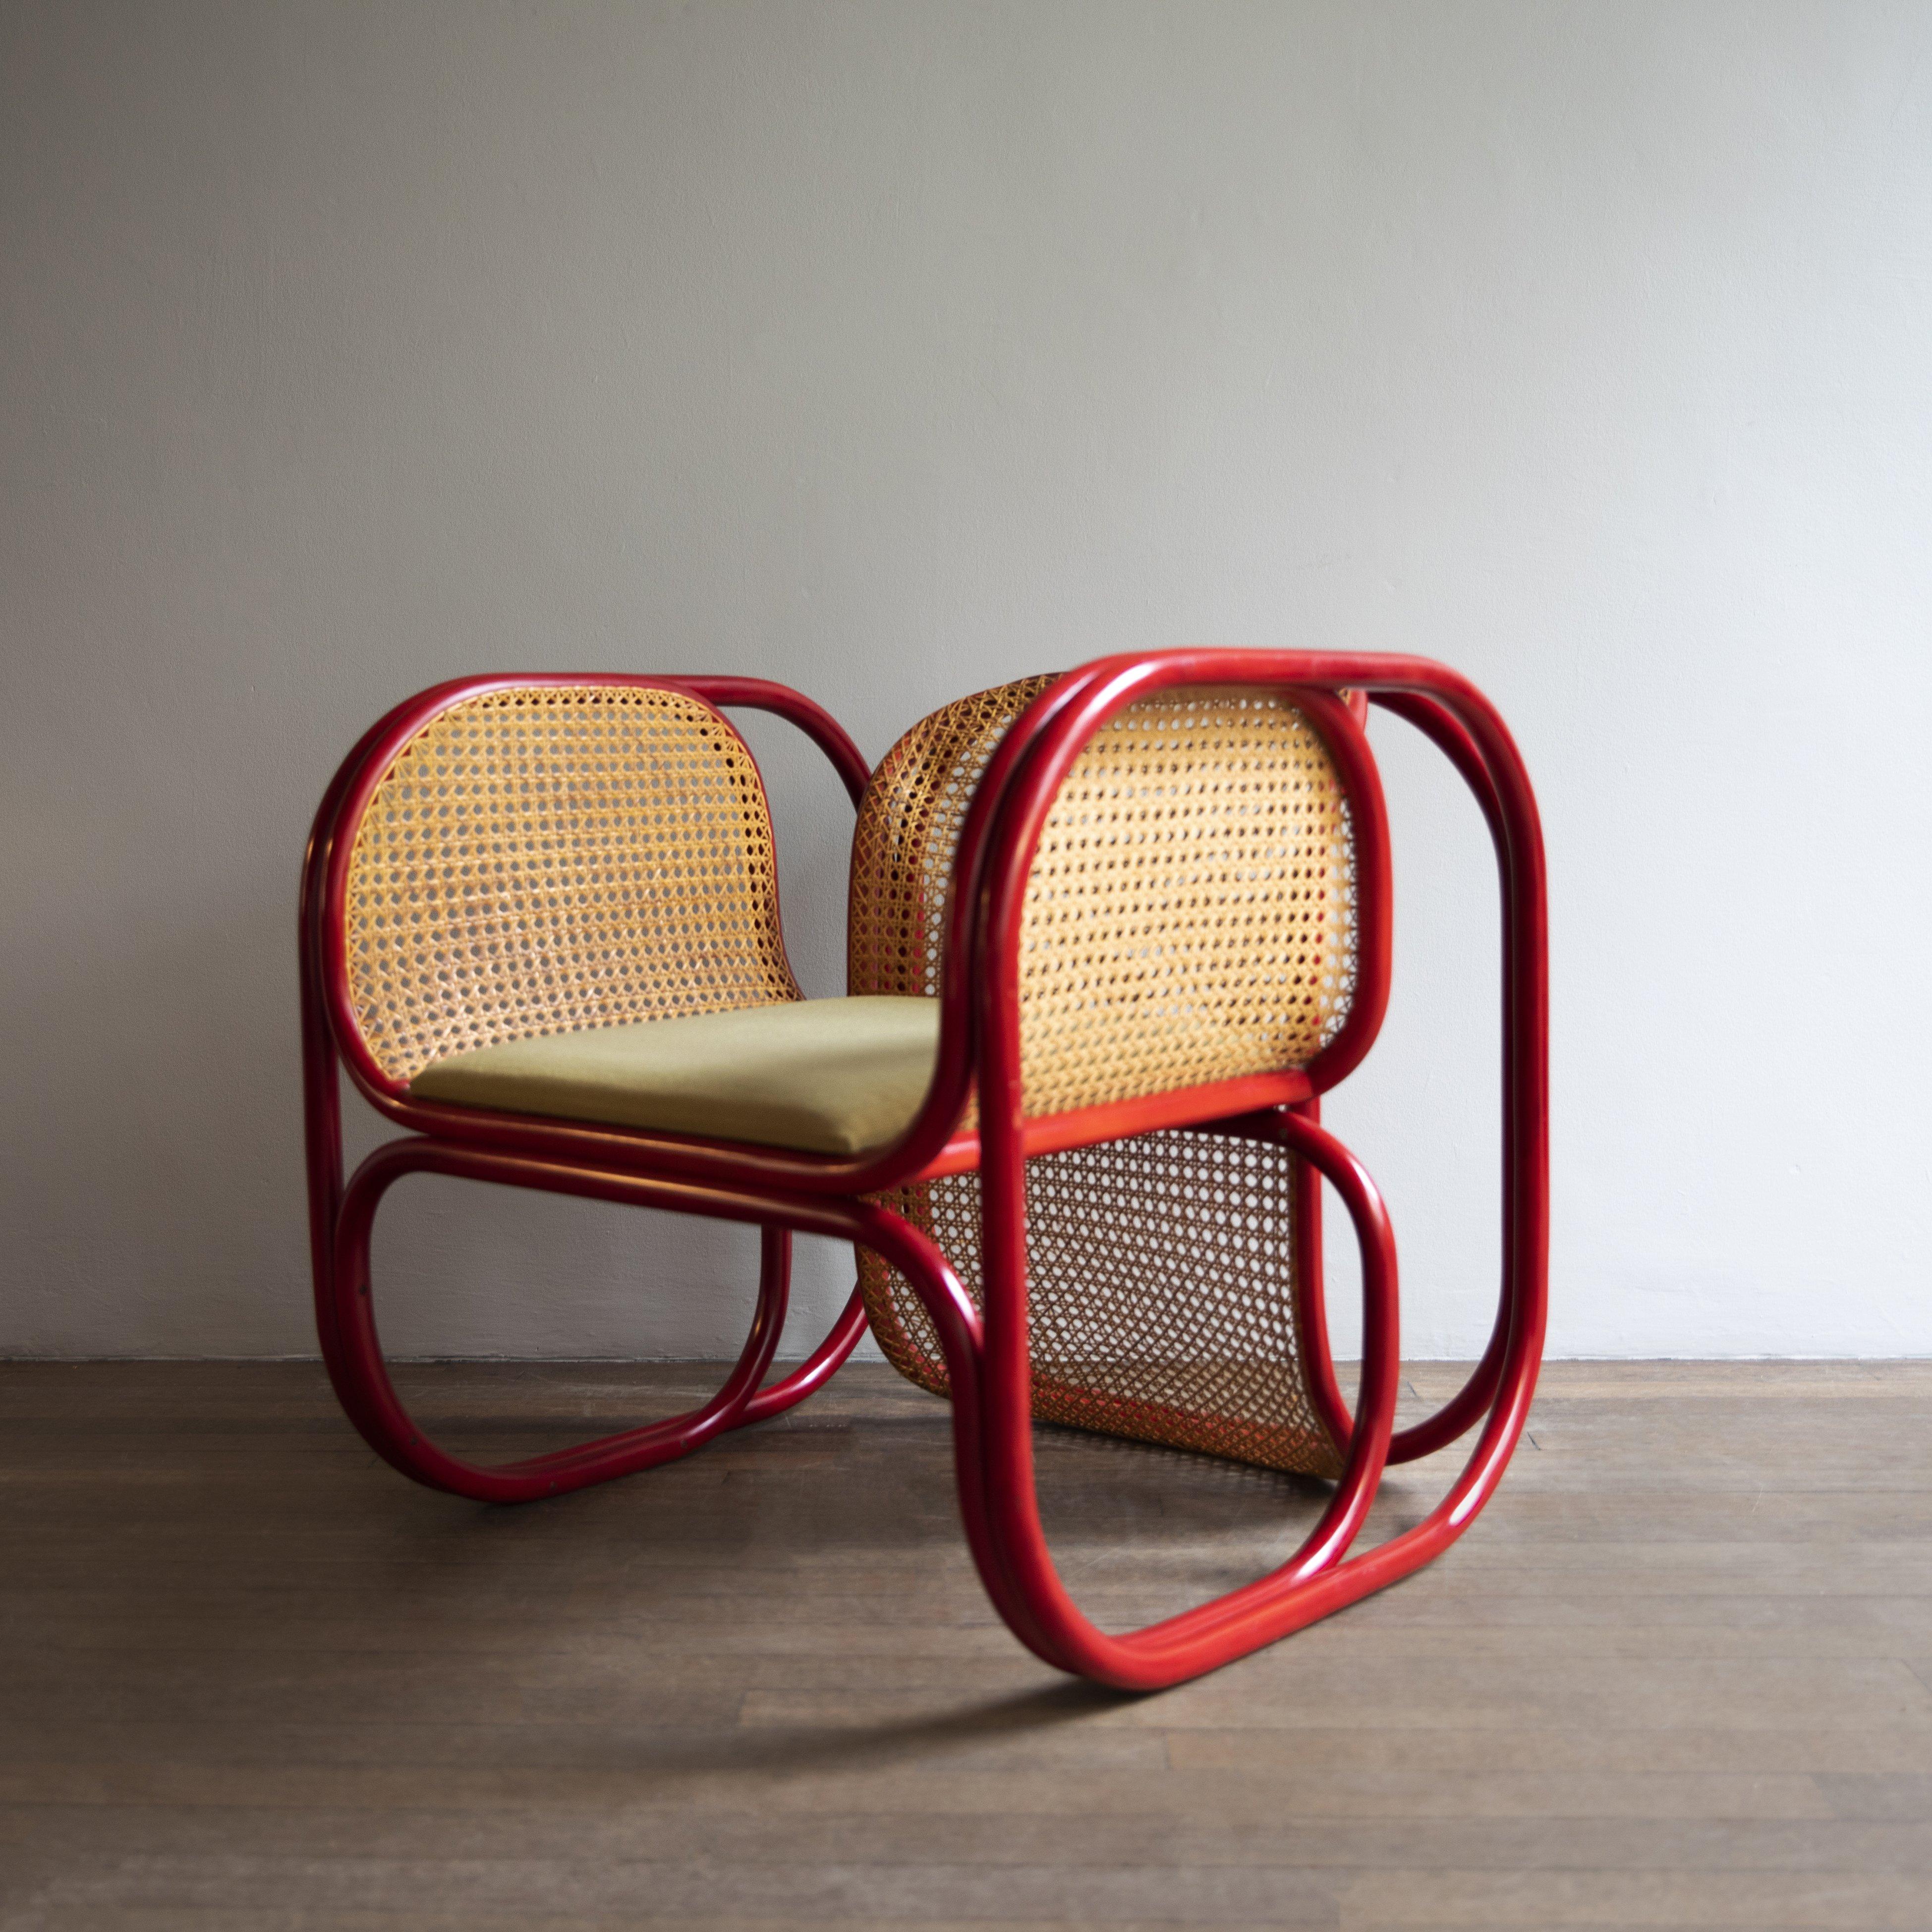 This pair of Cane and Bentwood Loungers were designed by the Czech architect Jan Bočan for the Czech embassy in Stockholm. Bočan commissioned Michael Thonet’s former factories in the Czech Republic, which operated during the 1970s as a state-owned